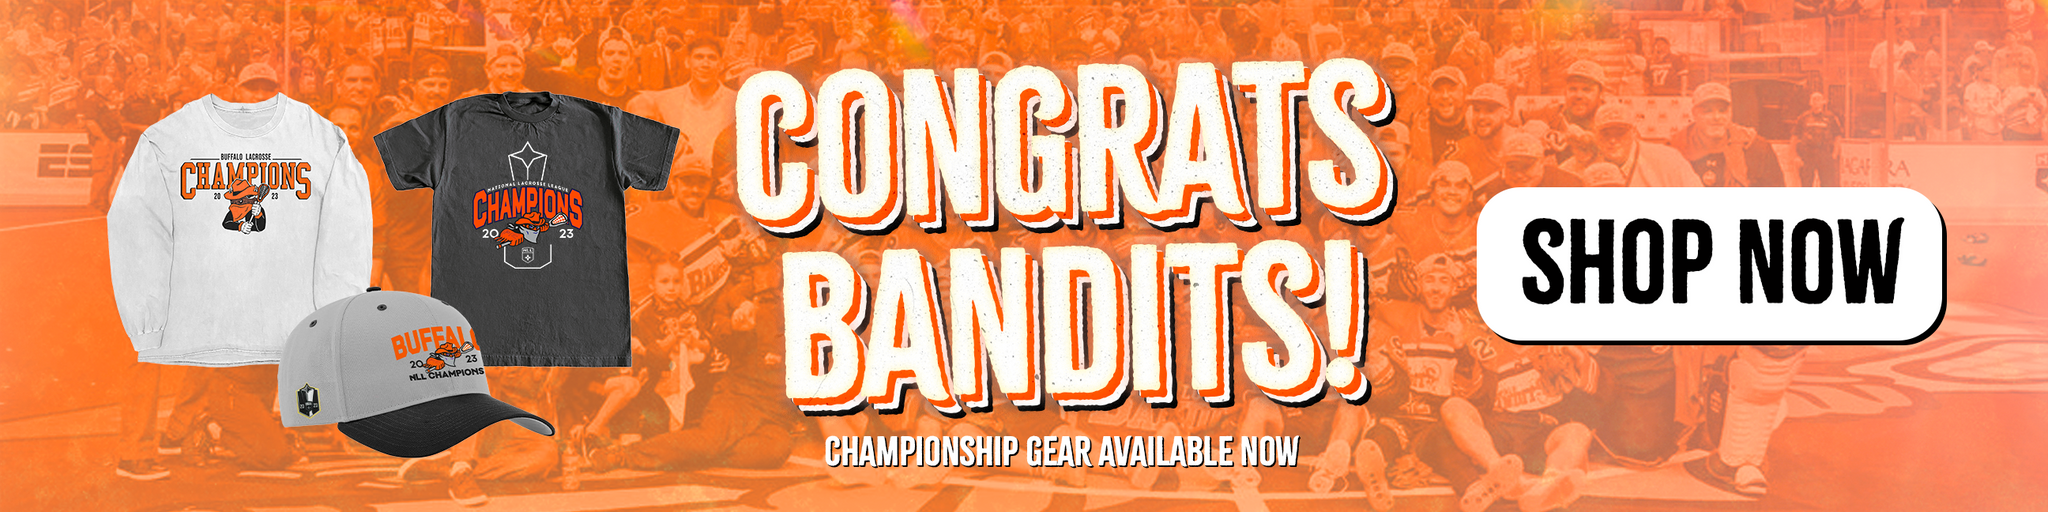 Buffalo Bandits banner showing their 2023 NLL Championship shirt and hat on the left and in the center reading congrats bandits! Championship gear available now with a shop now button